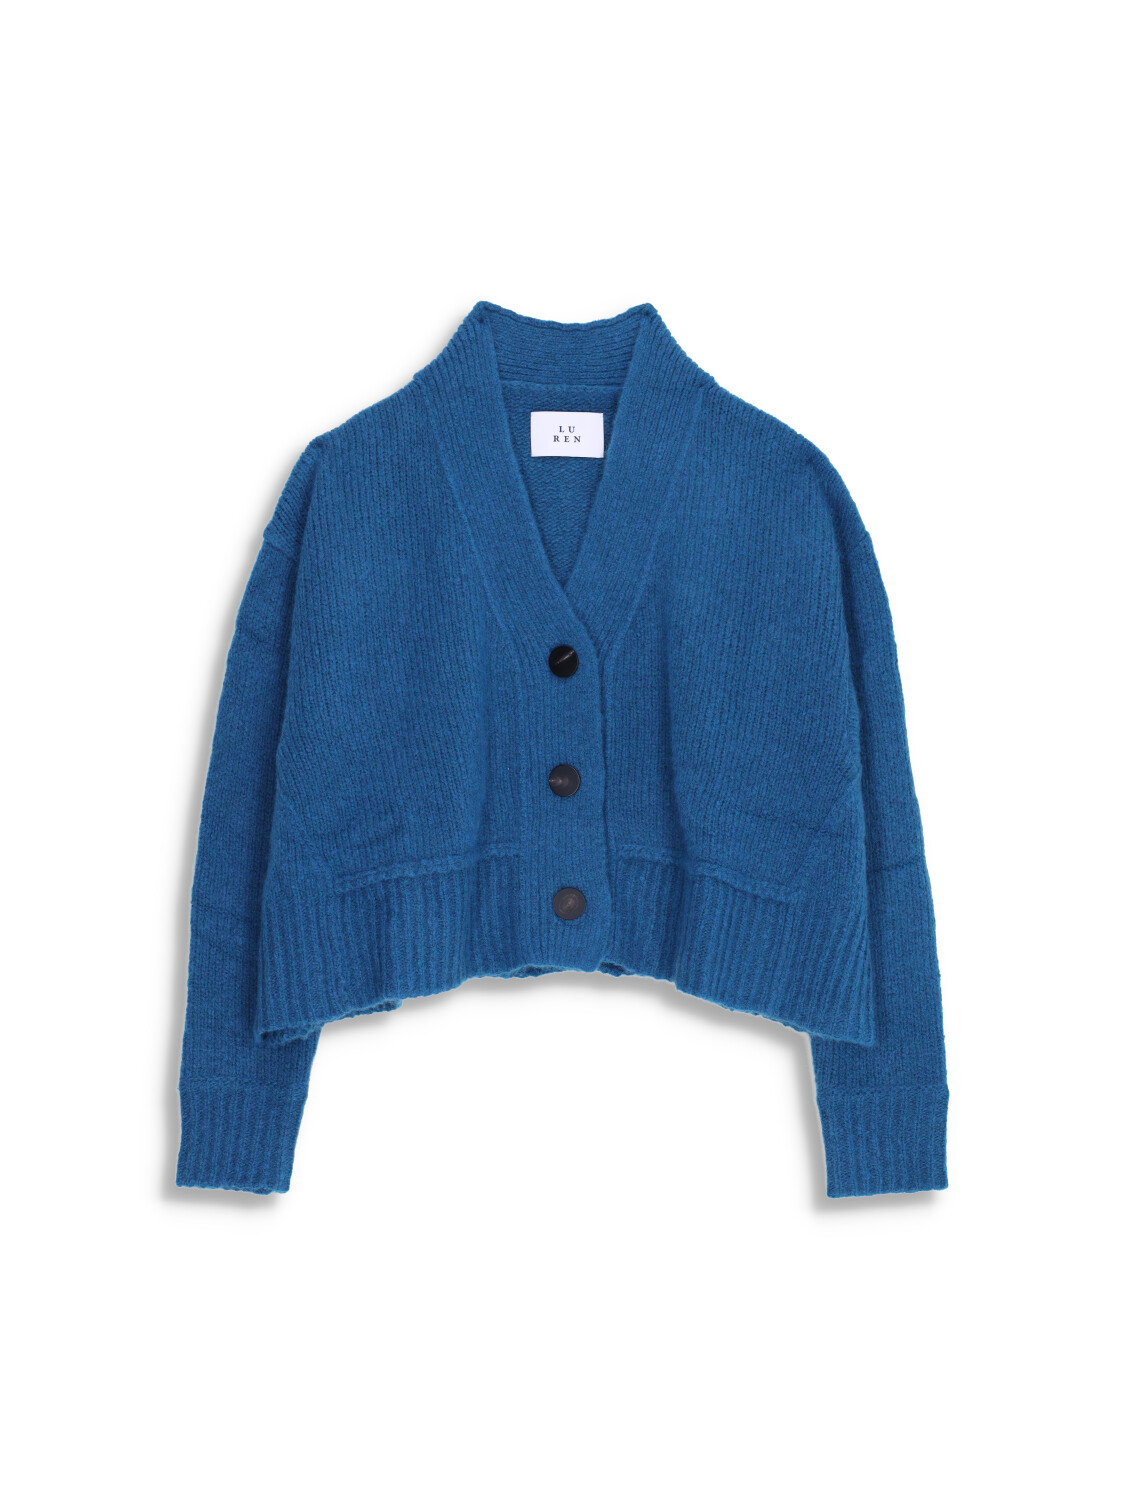 Riely D. - Oversized cardigan with button placket